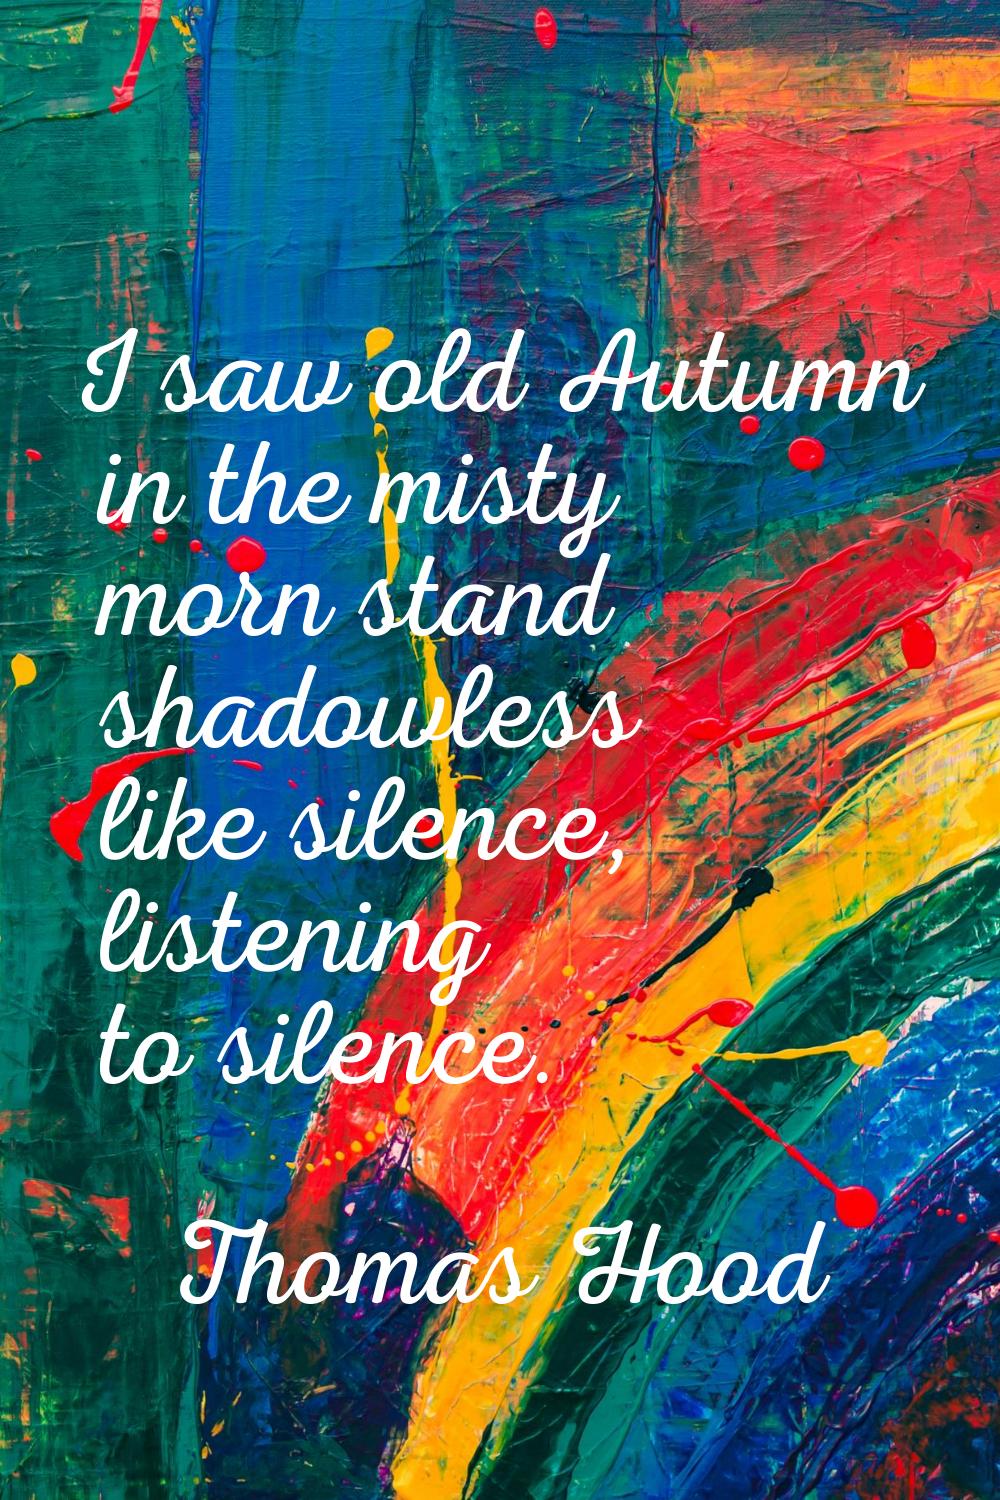 I saw old Autumn in the misty morn stand shadowless like silence, listening to silence.